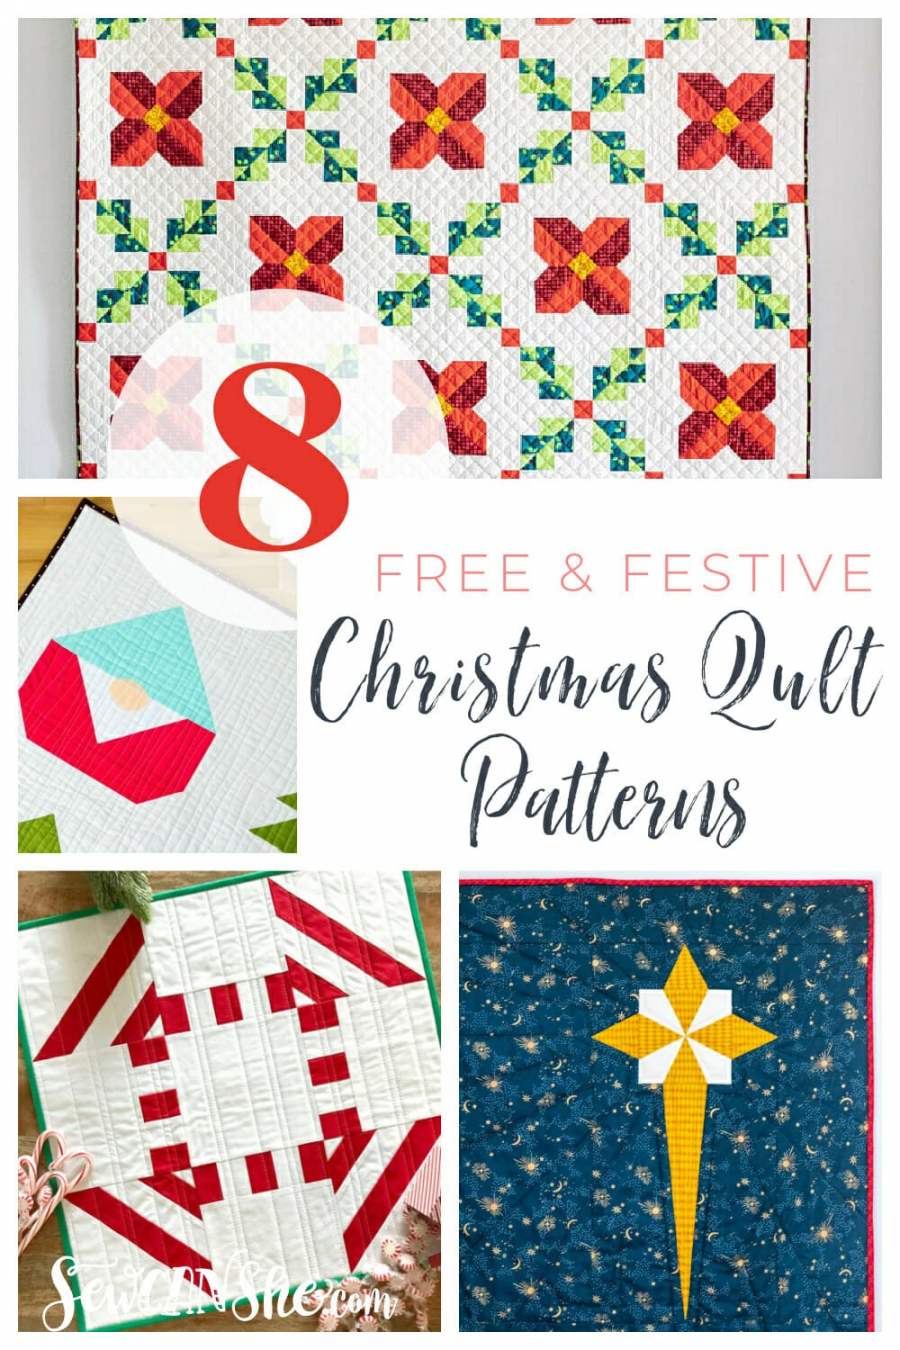 Free and Festive Christmas Quilt Patterns - FREE Printables - Free Printable Christmas Quilt Patterns Free